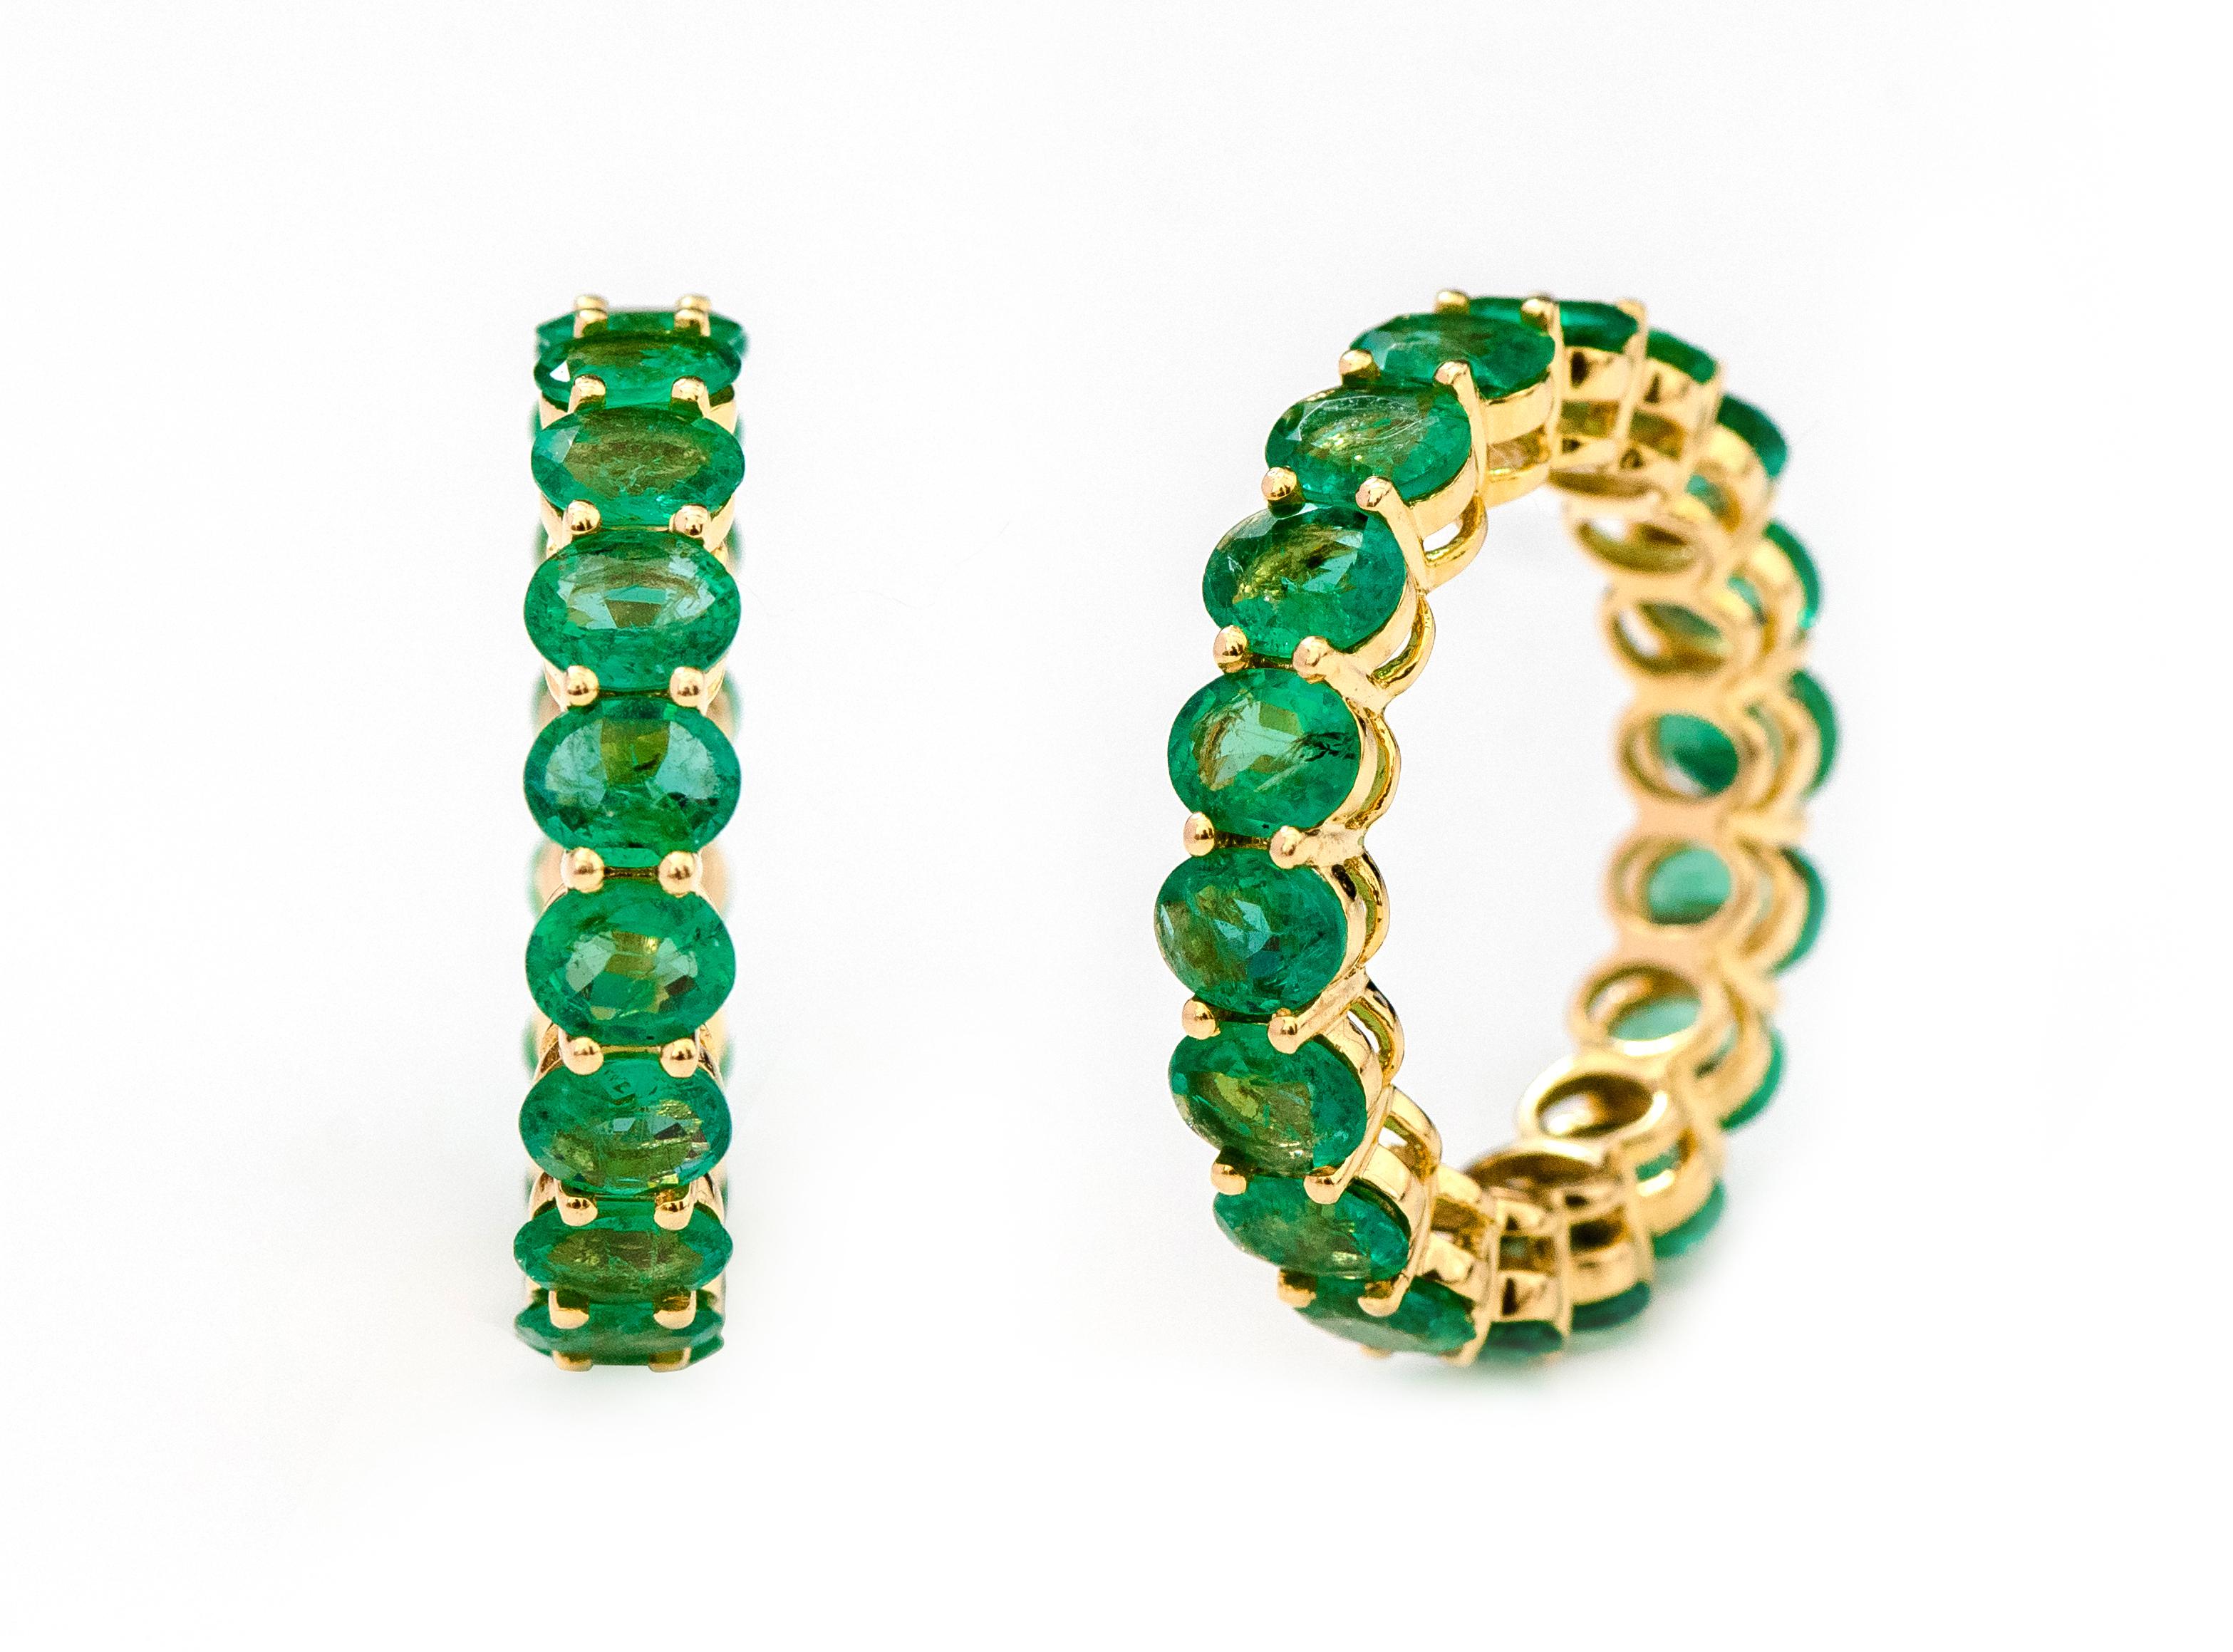 18 Karat Yellow Gold 4.78 Carat Oval-Cut Natural Emerald Eternity Band Ring

This glorious emerald band is sensational. The solitaire horizontally placed oval shape emeralds in grain prong yellow gold setting is timeless. The ideally cut, size, and